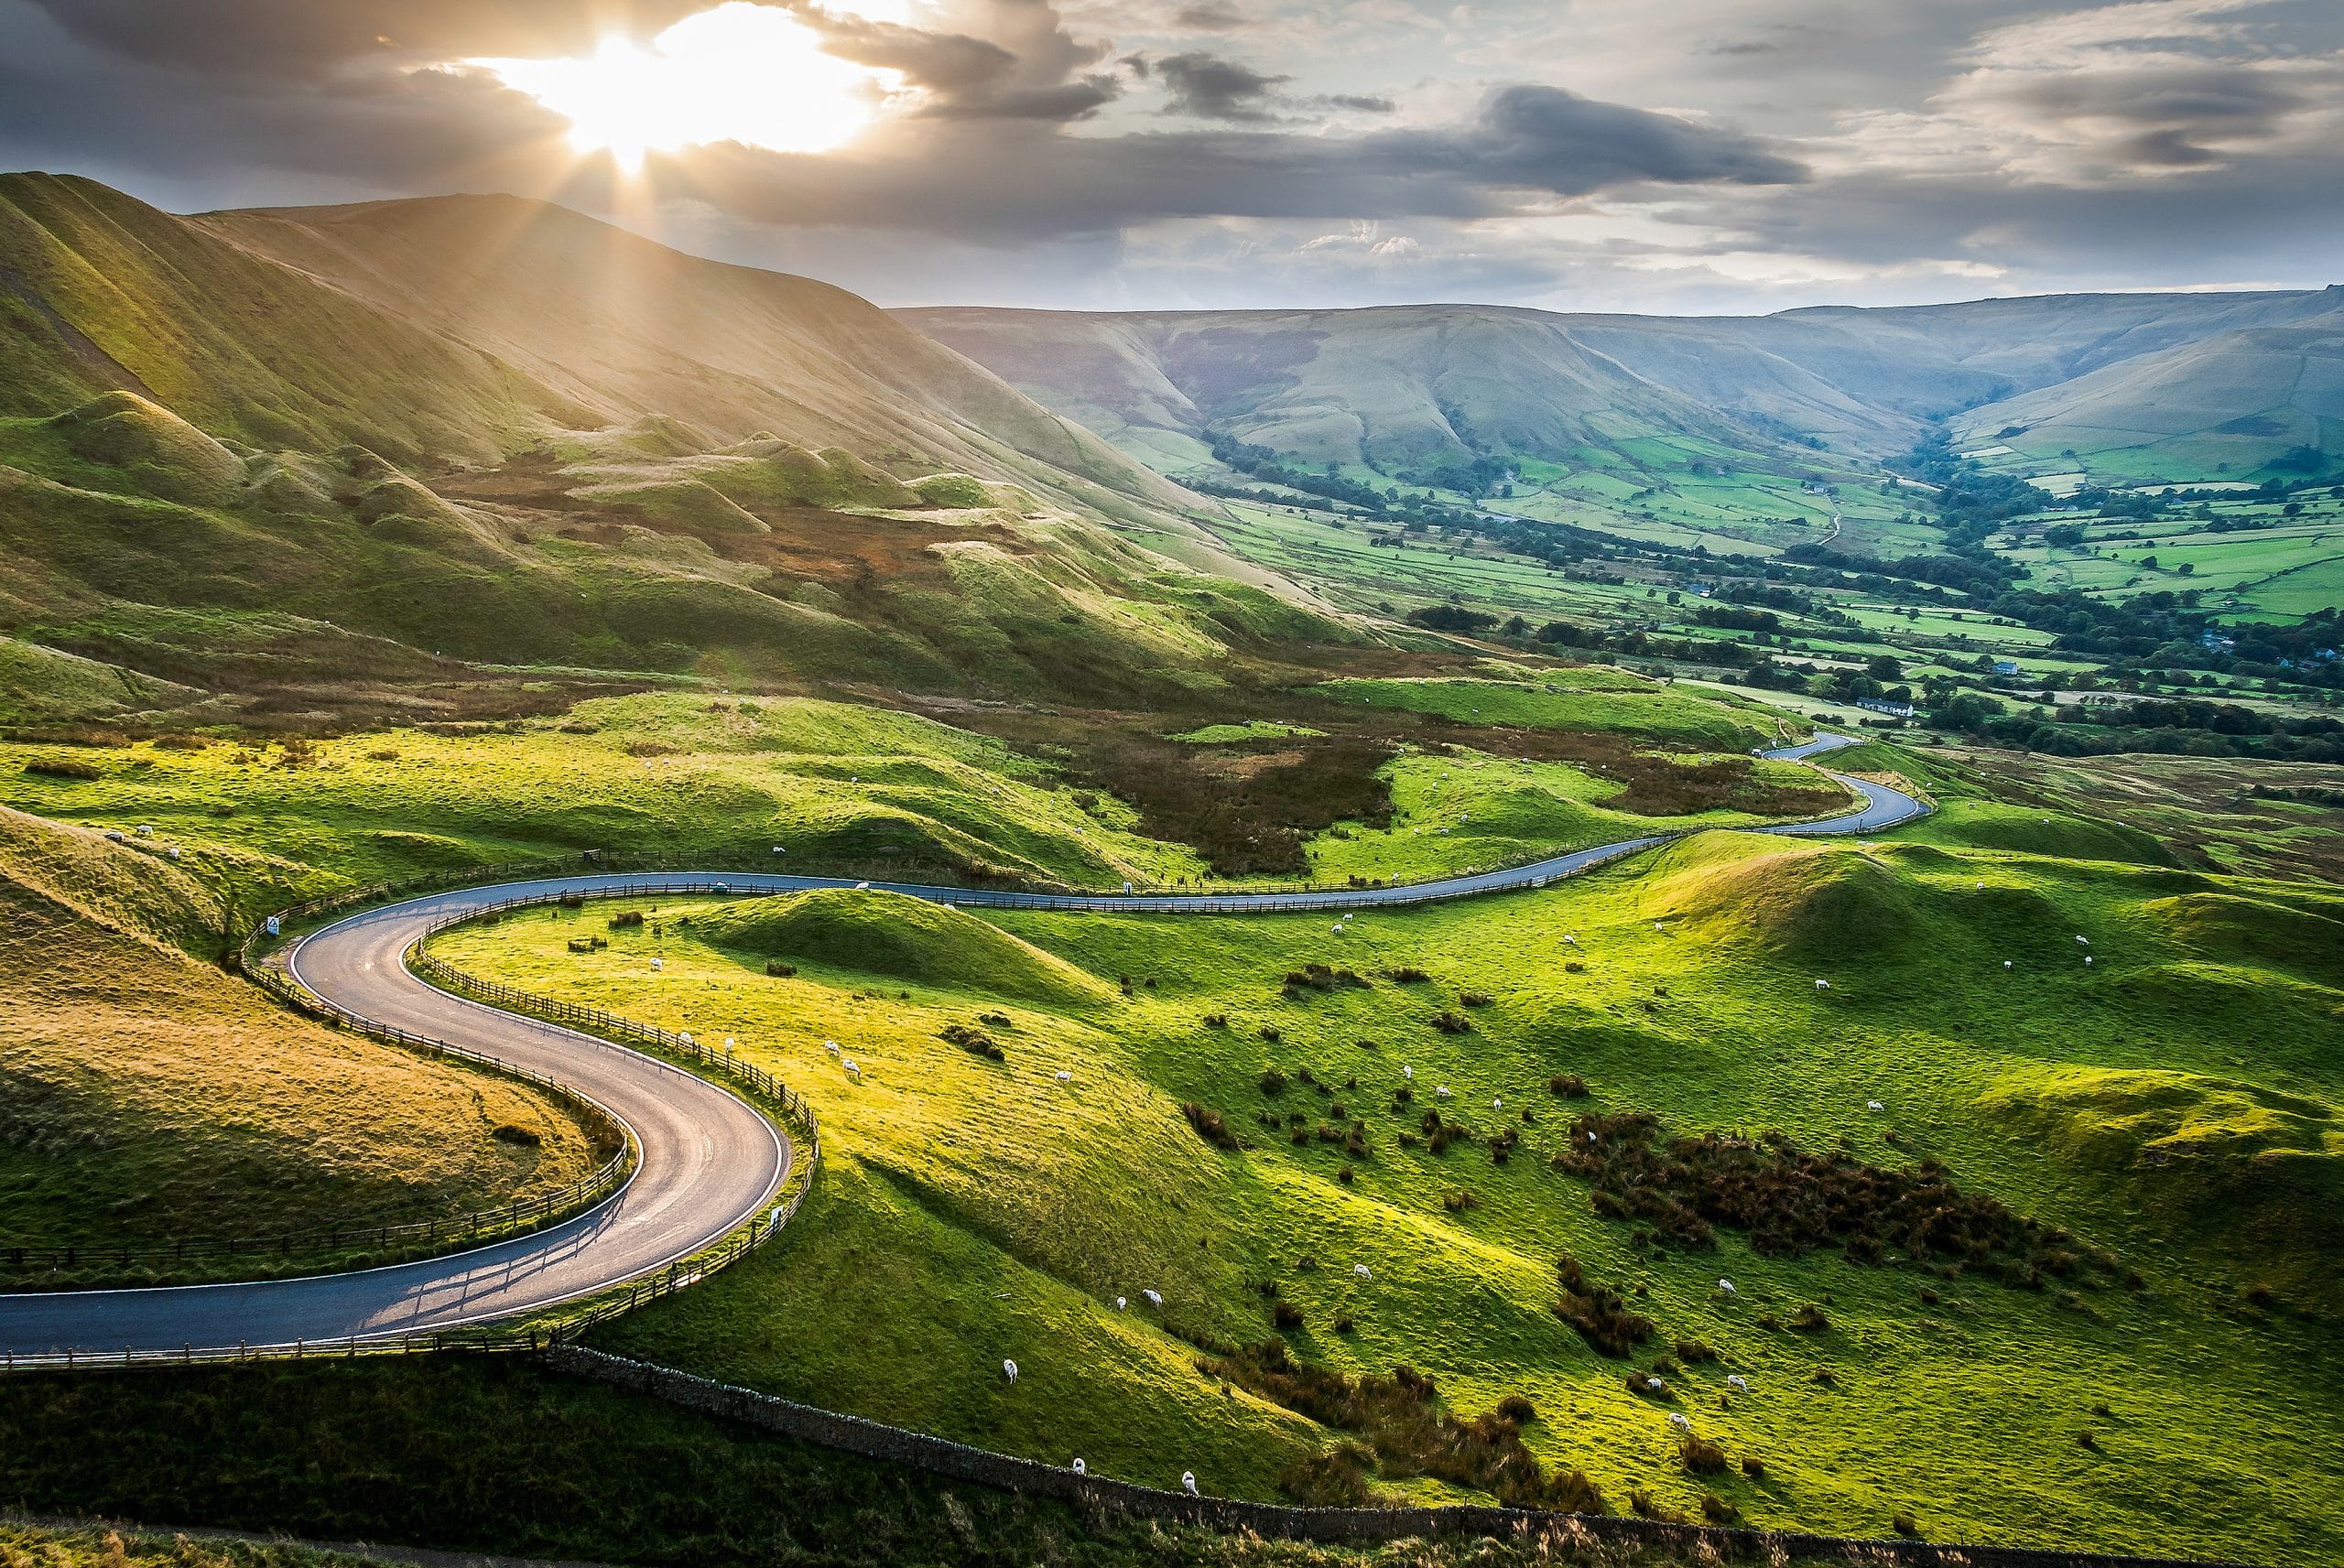 A view of a sunset along a winding road among green hills